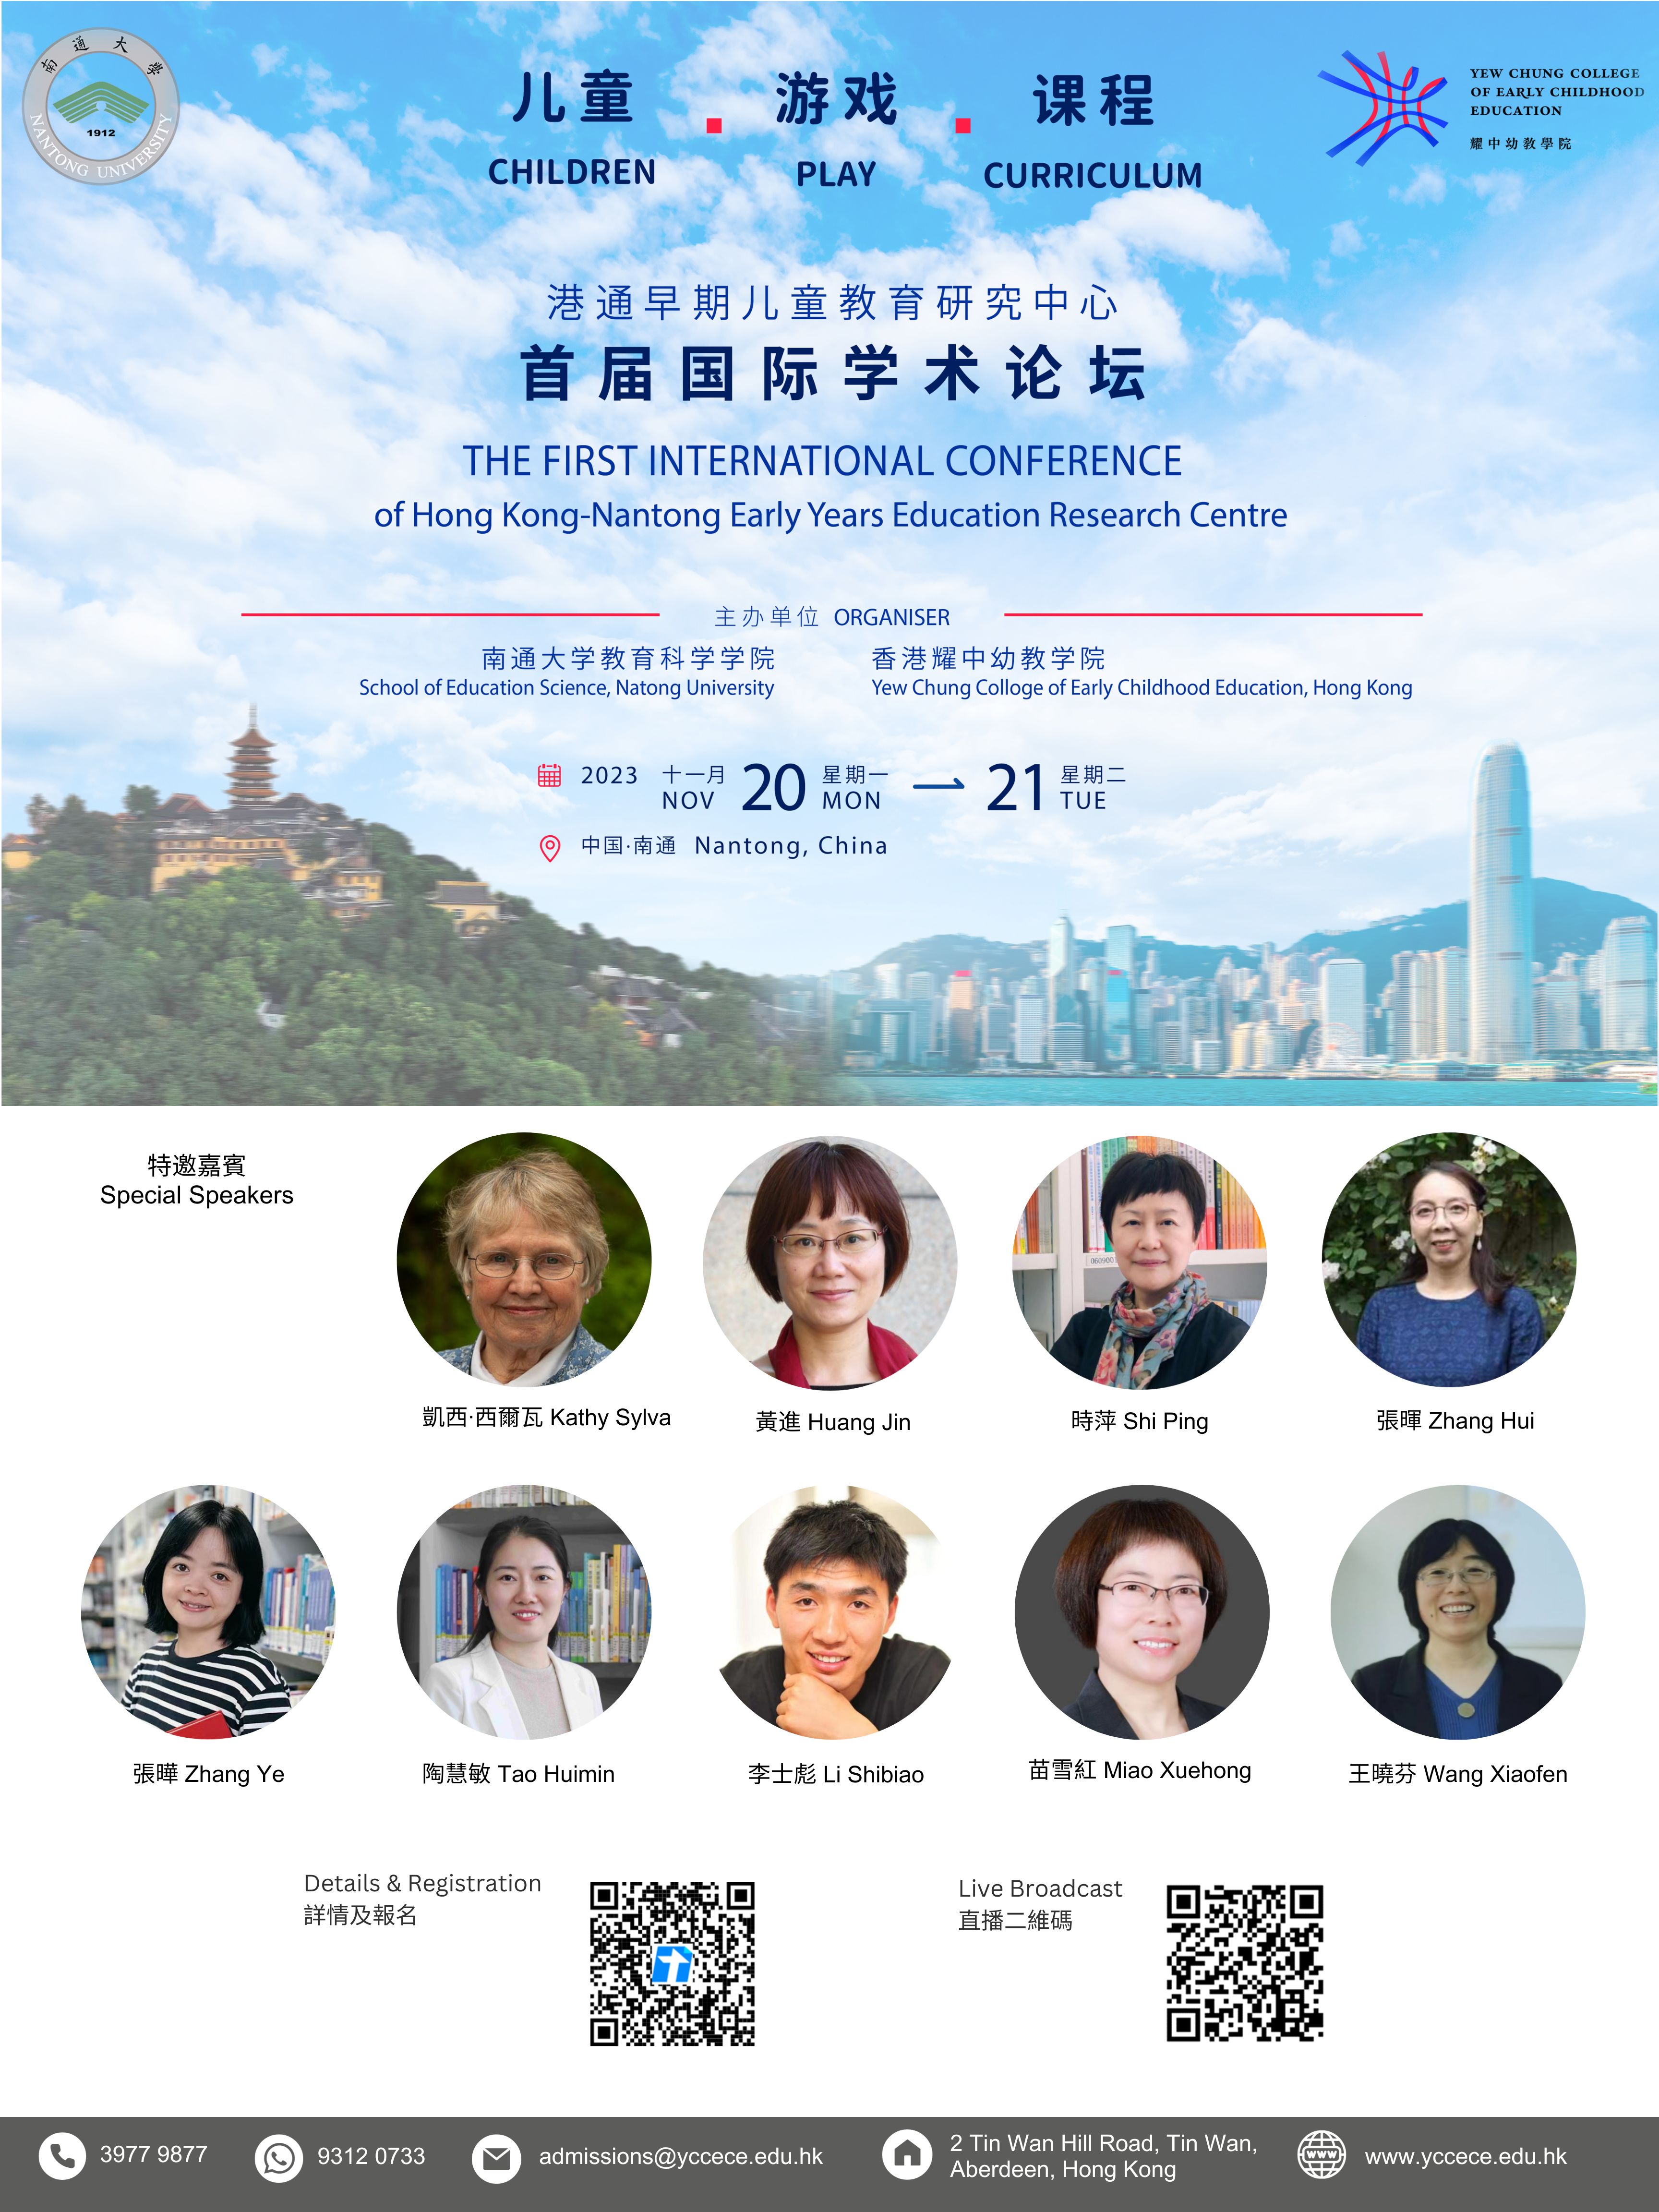 The First International Conference of Hong Kong Nantong Early Years Education Research Centre